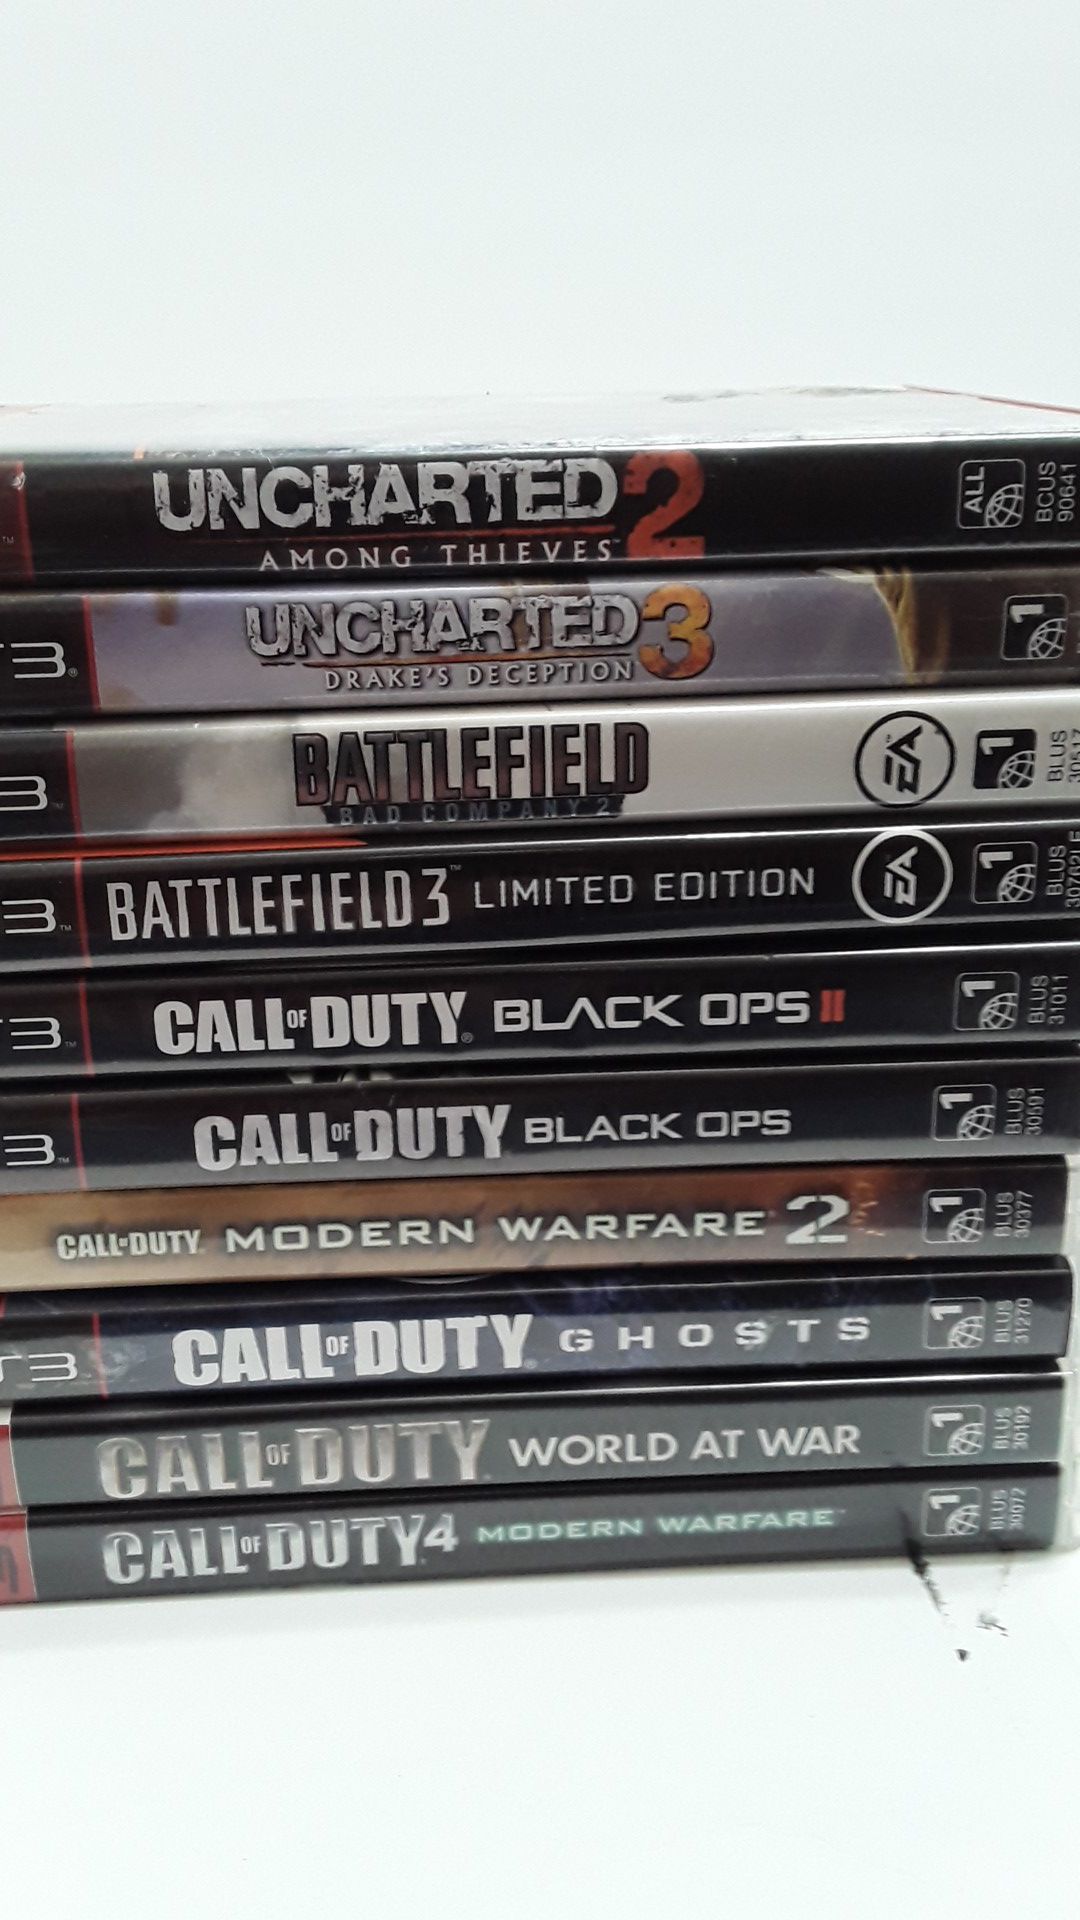 10 playstation 3 games, call of Duty, Battlefield, and Unchartered